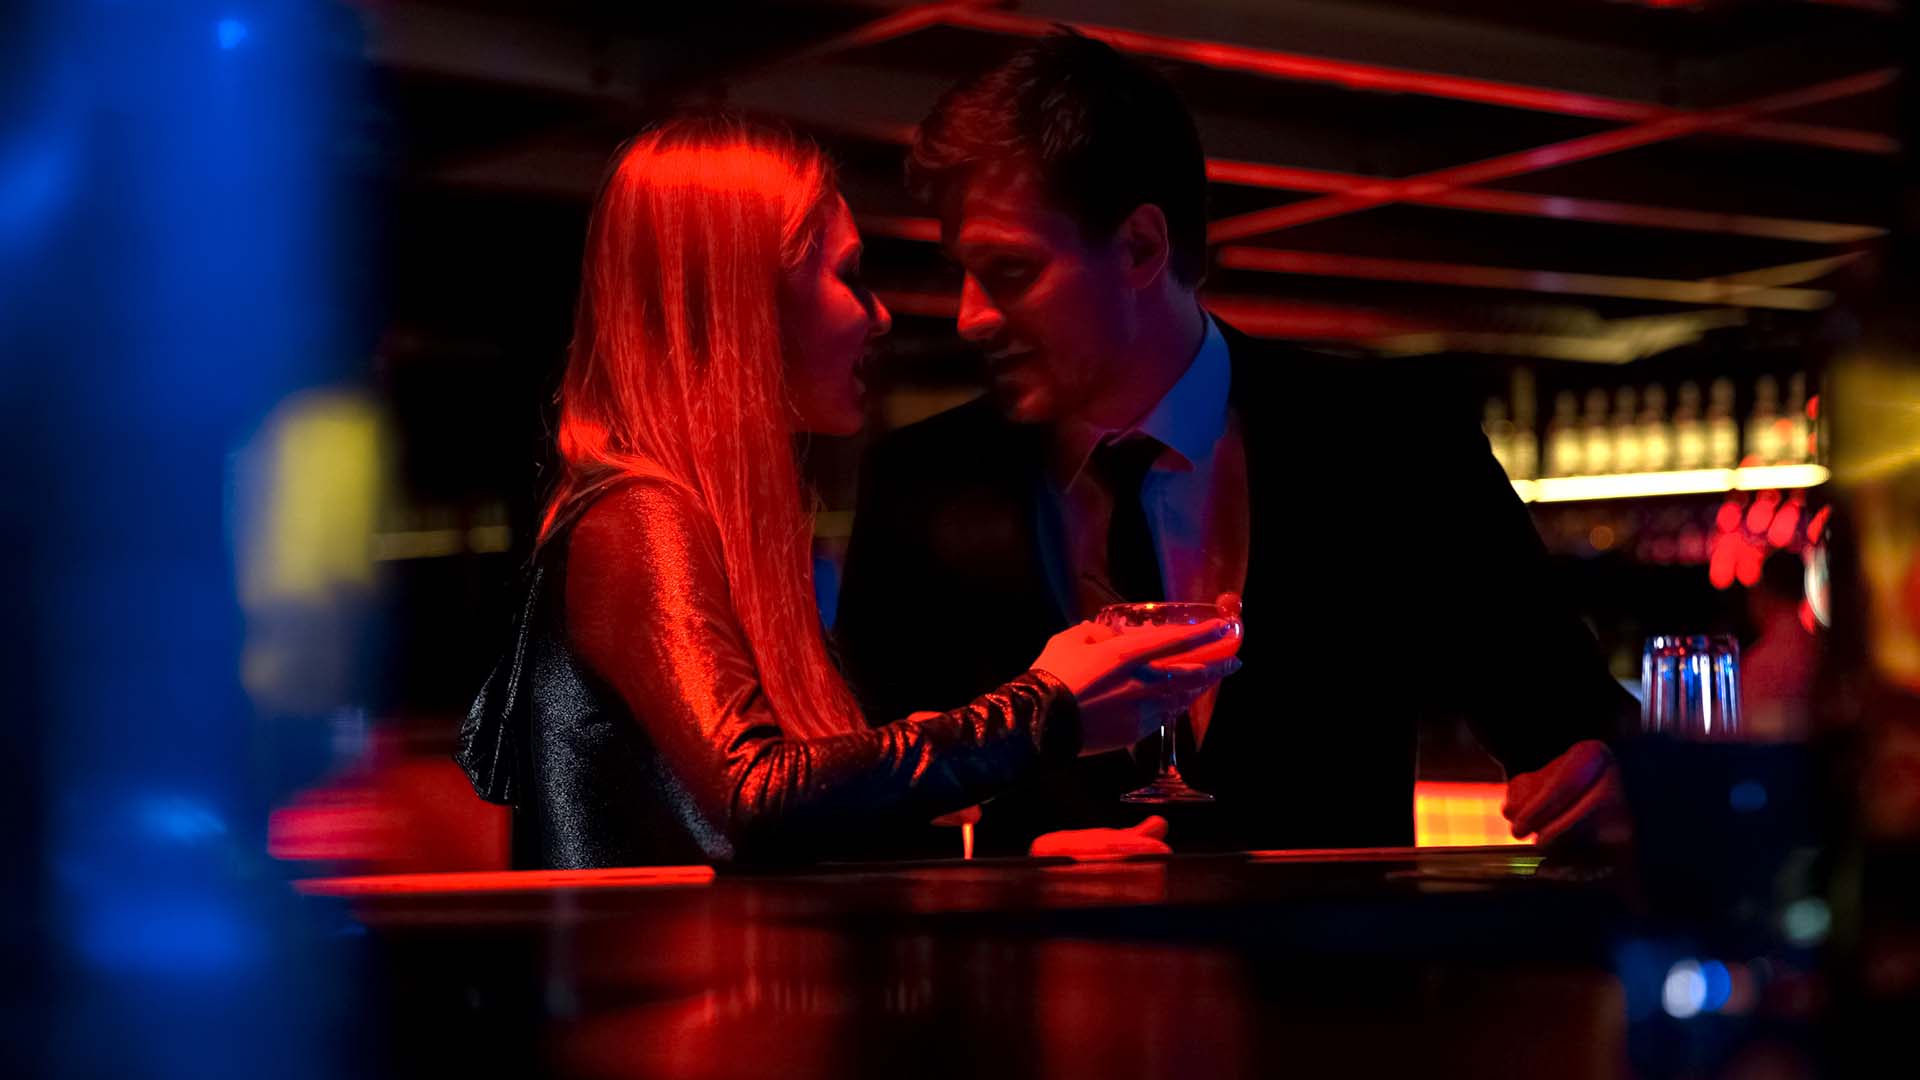 Man in black suit and woman in long-sleeved shirt enjoying drinks while looking at each other. Red colored lights around them.